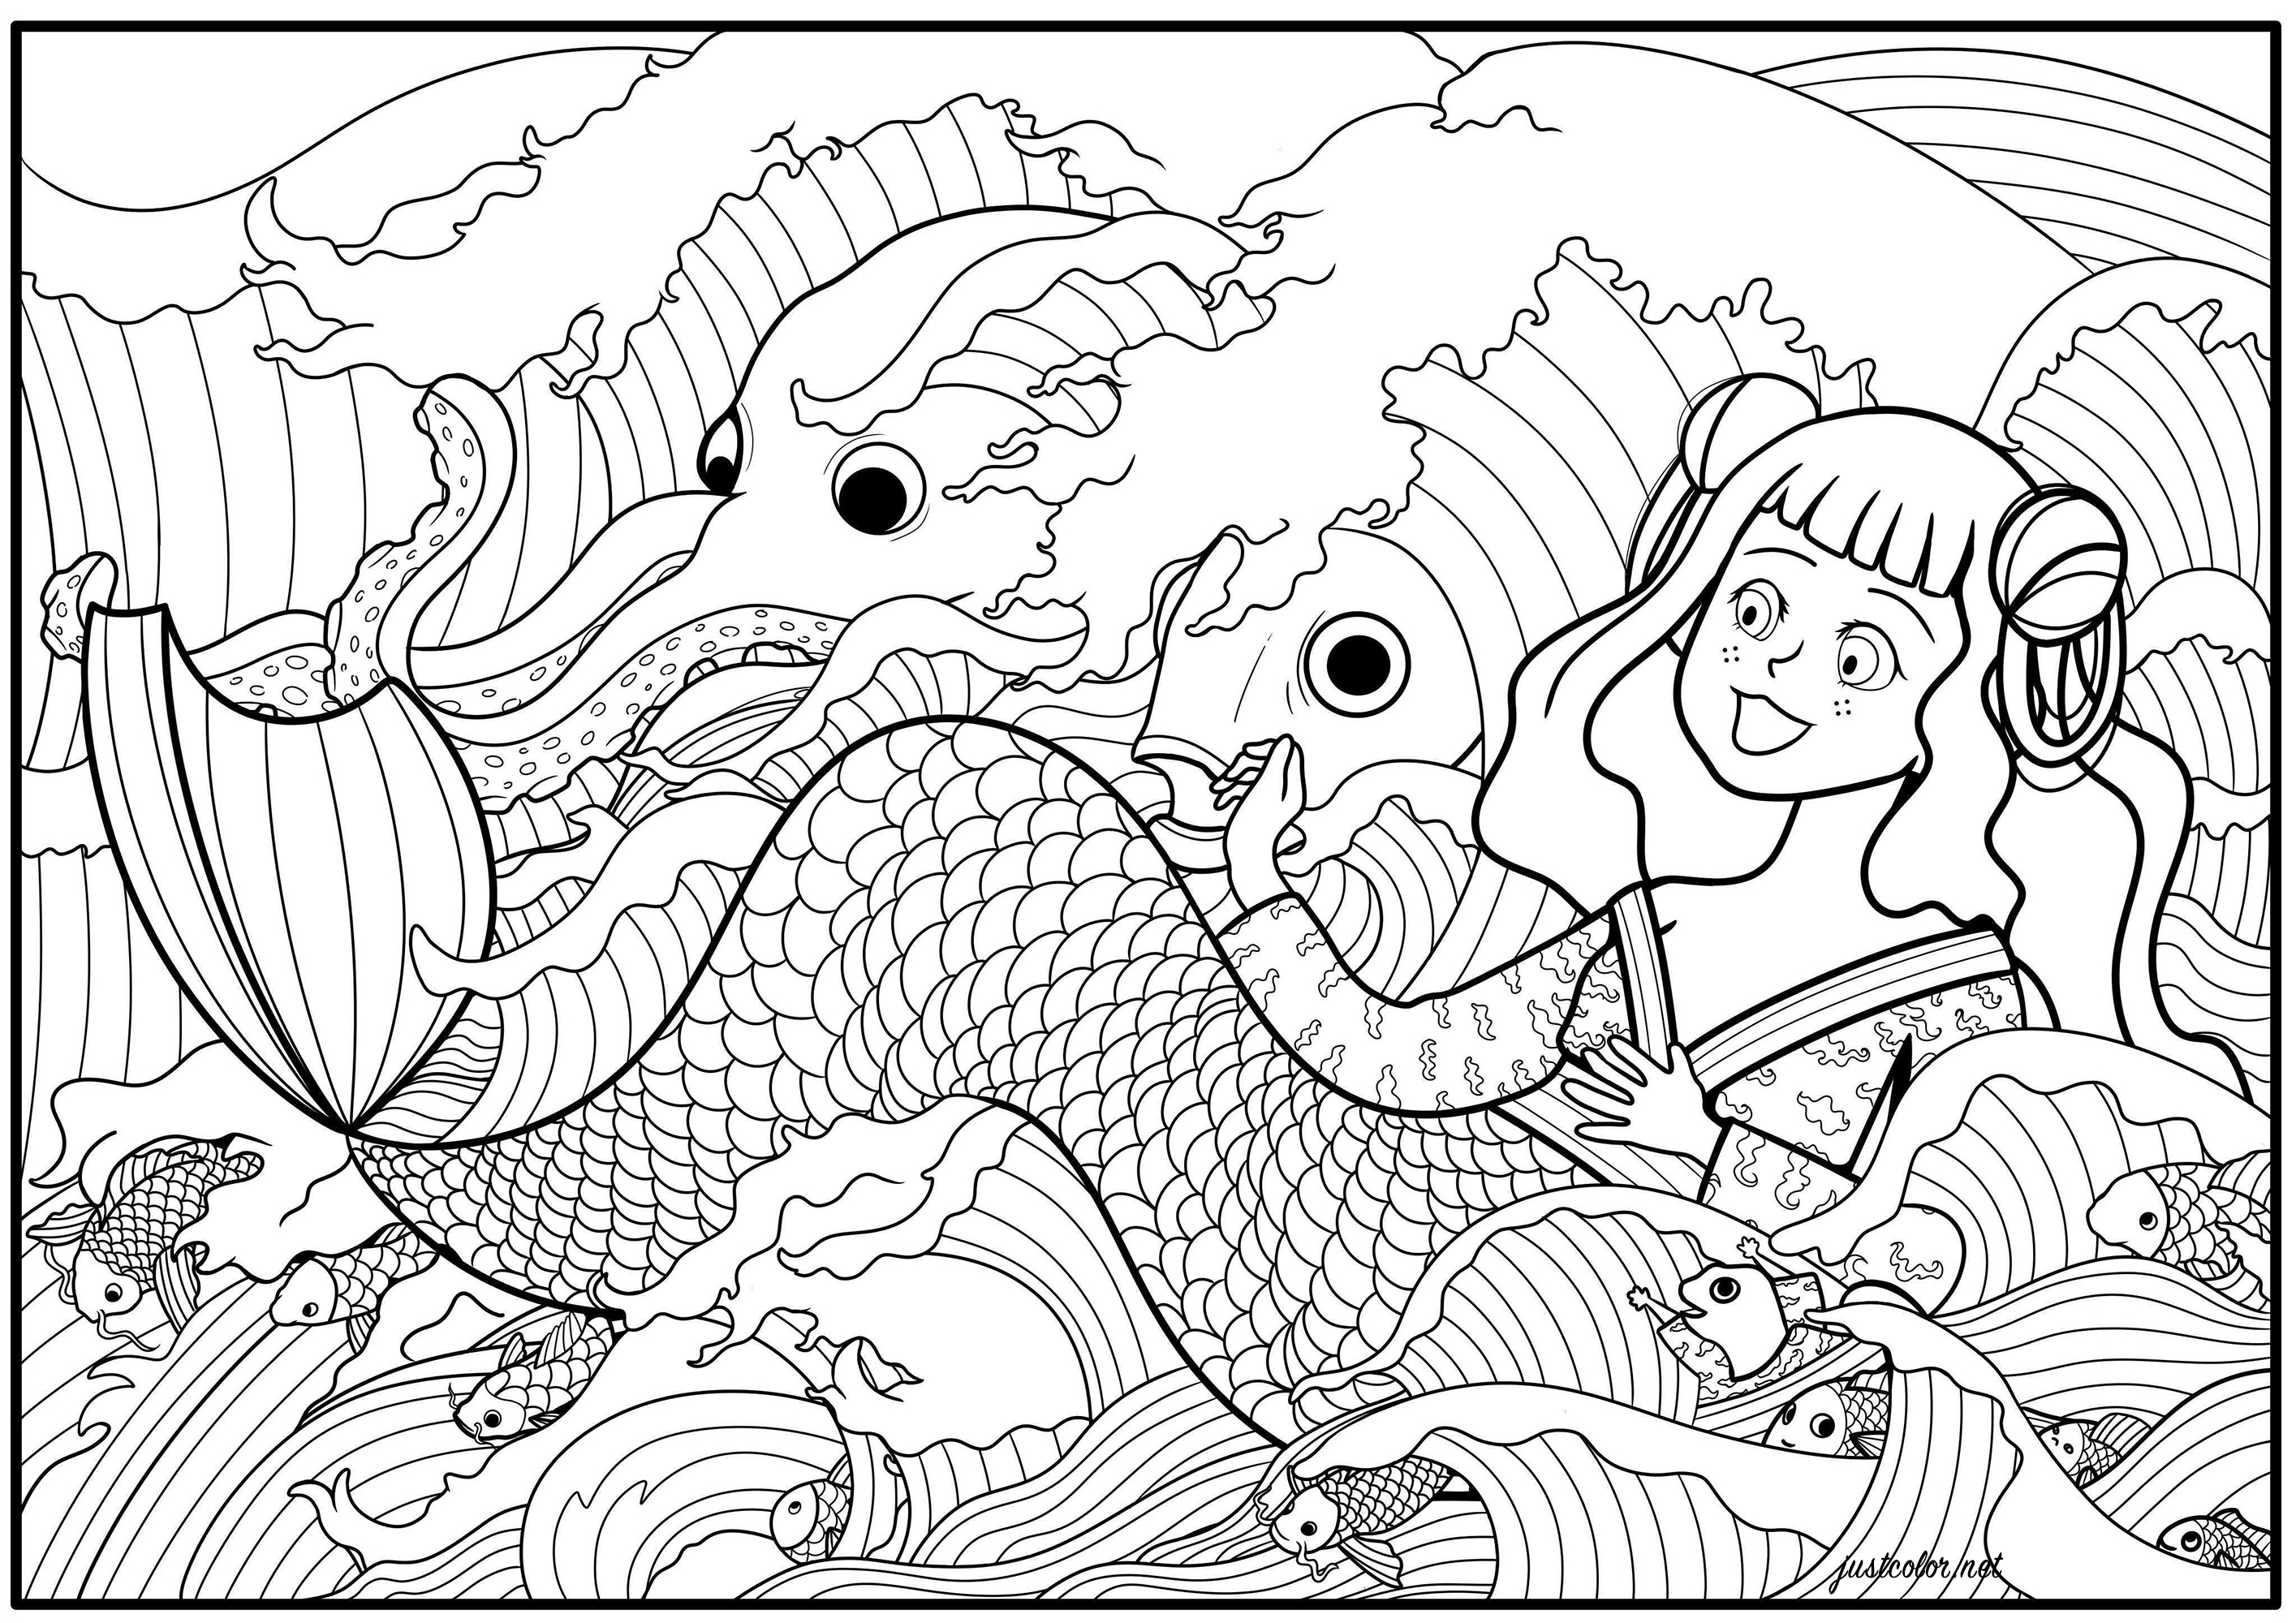 This coloring page shows a mermaid surrounded by waves and several sea animals.  This is a reinterpretation of an illustration by Benjamin Lacombe, Artist : Océane D